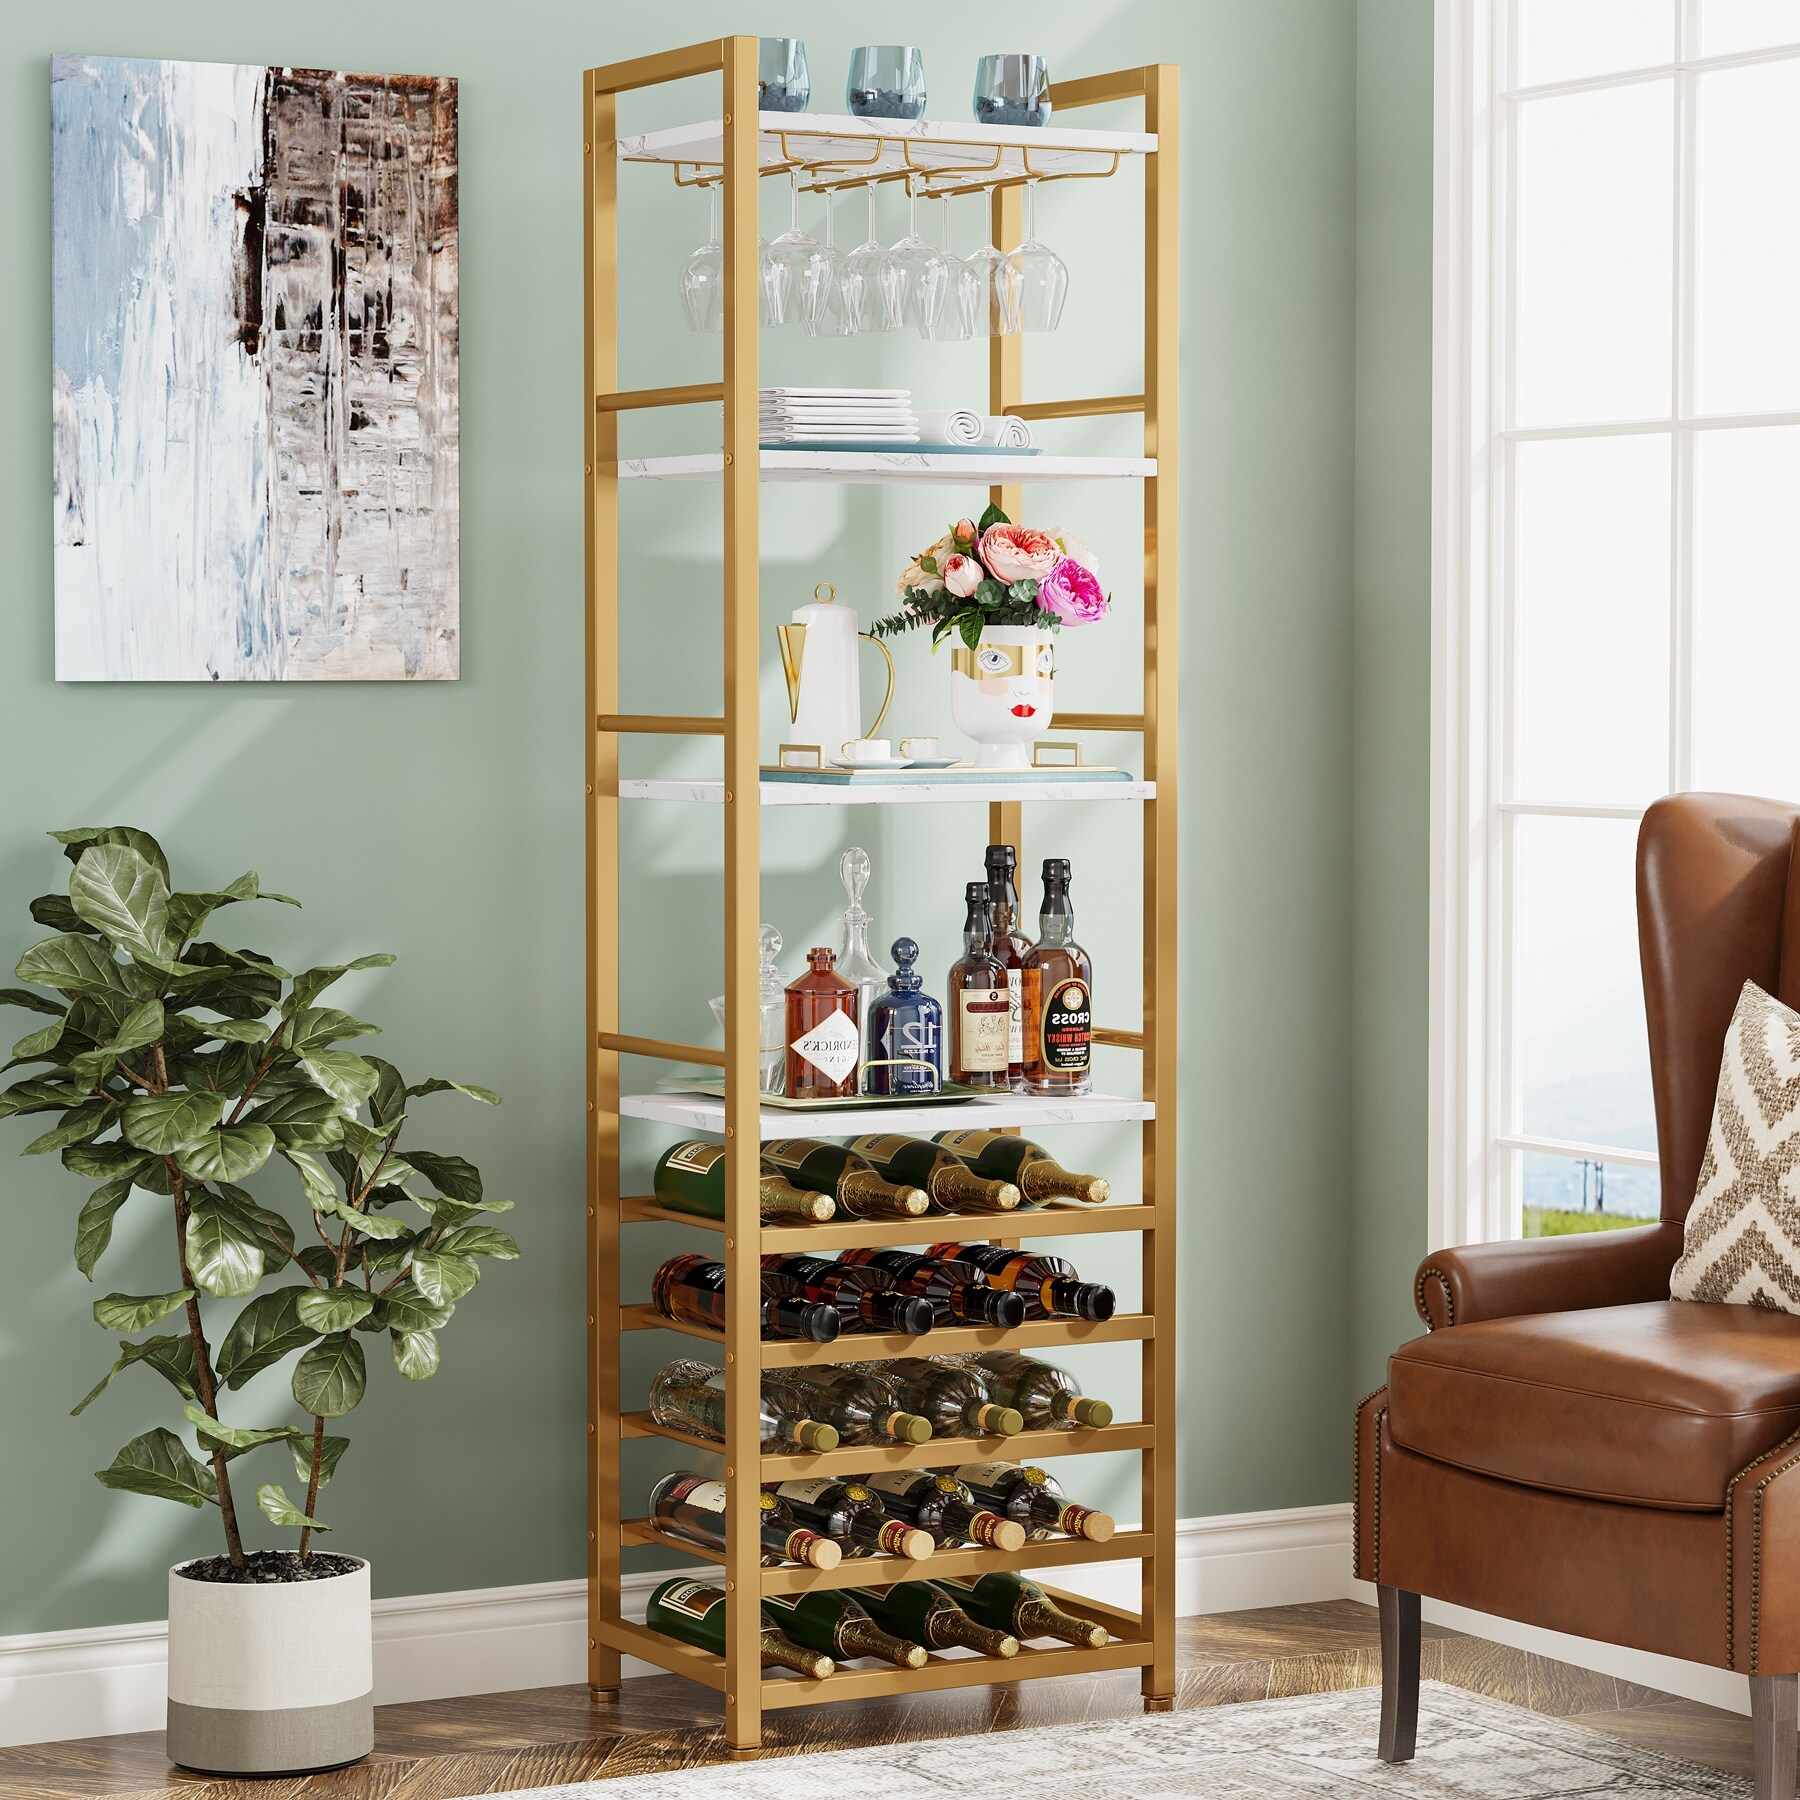 https://ak1.ostkcdn.com/images/products/is/images/direct/bc7d63fd3659d0a62fe32dd9f720b459bb3527c7/Freestanding-Wine-Rack-with-Glass-Holder-and-Storage-Shelves%2C-20-Bottle-Wine-Bakers-Rack-for-Home-Kitchen%2C-Dining-Room%2C-Brown.jpg